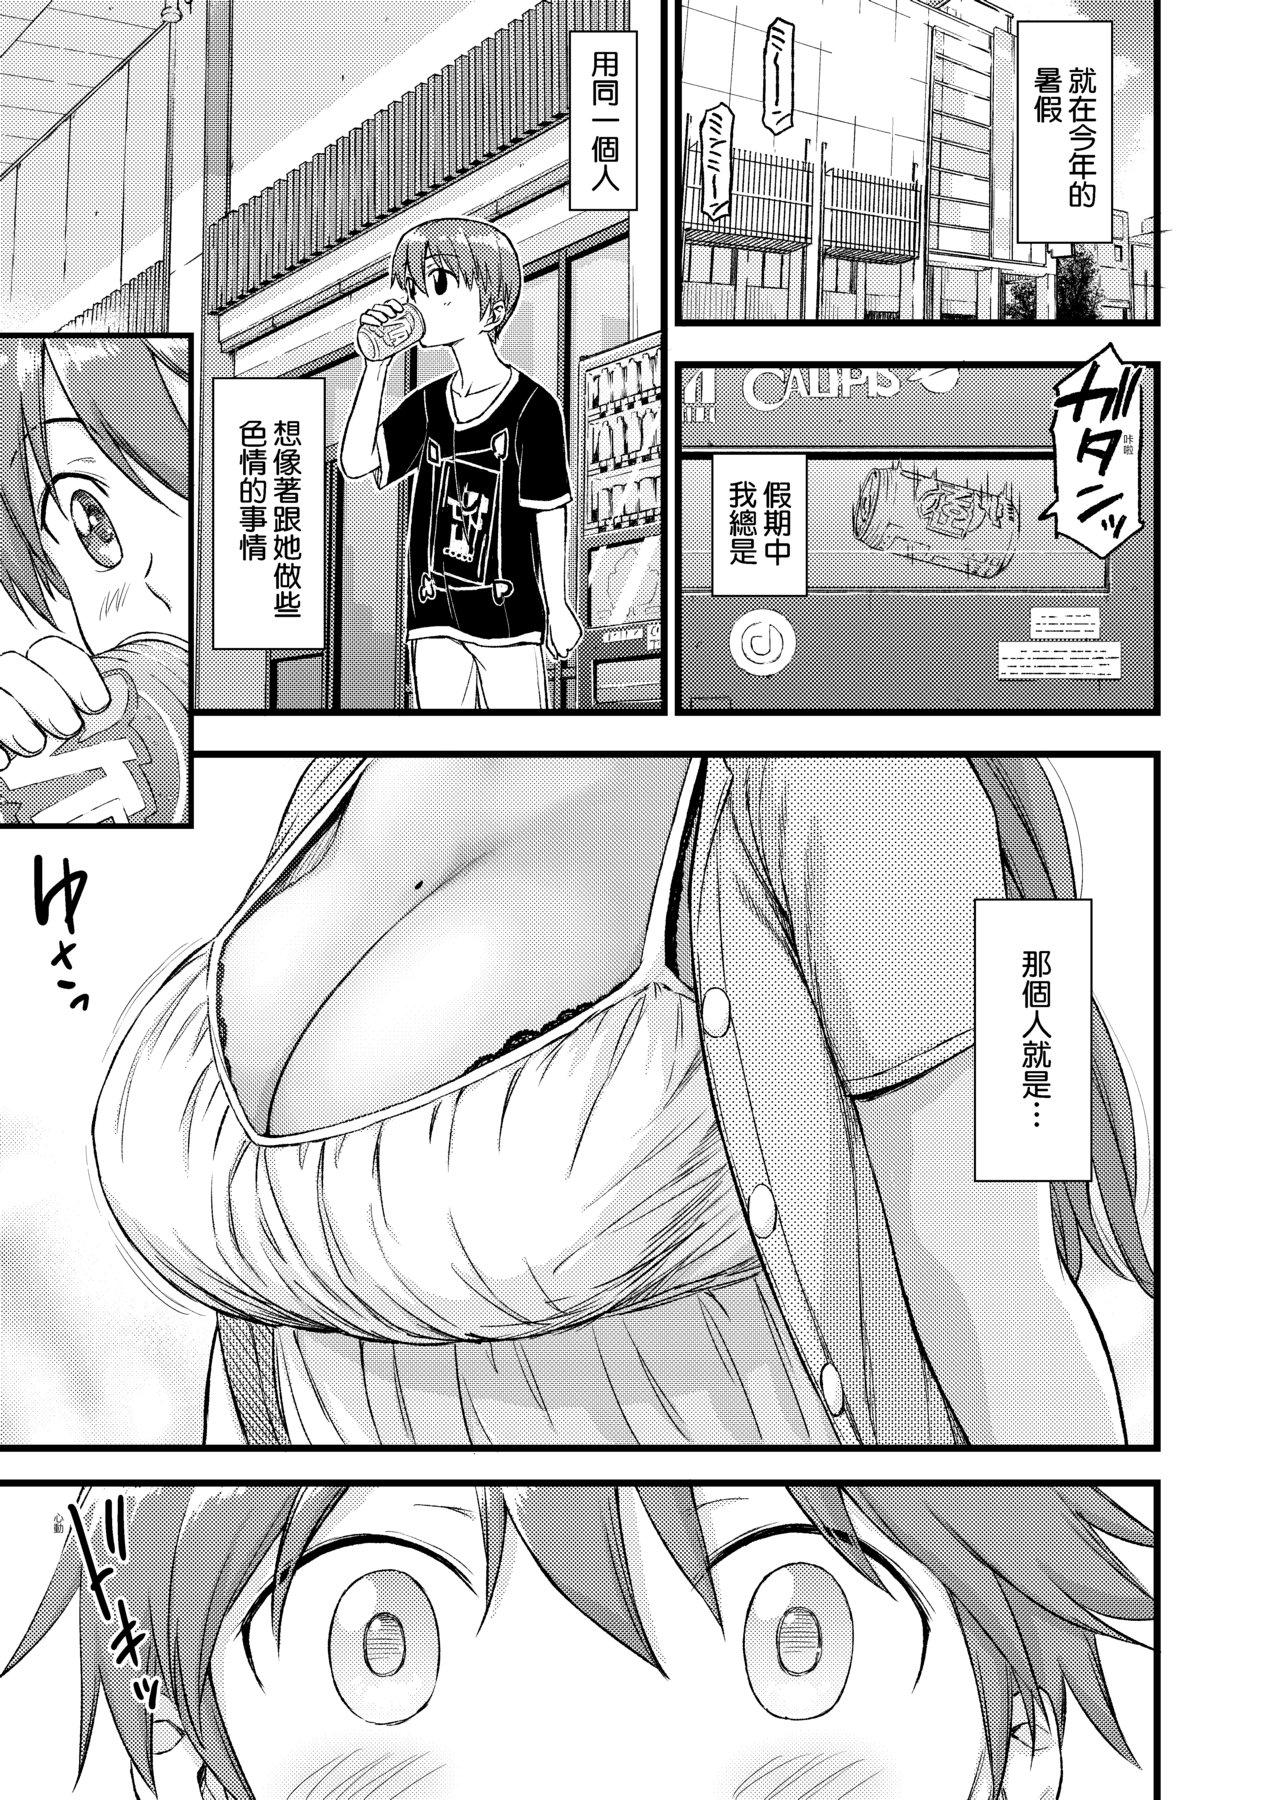 Flaquita Oppai na Natsuyasumi - Summer Vacation With Oppai | 乳香四溢的暑假 Fingers - Page 10